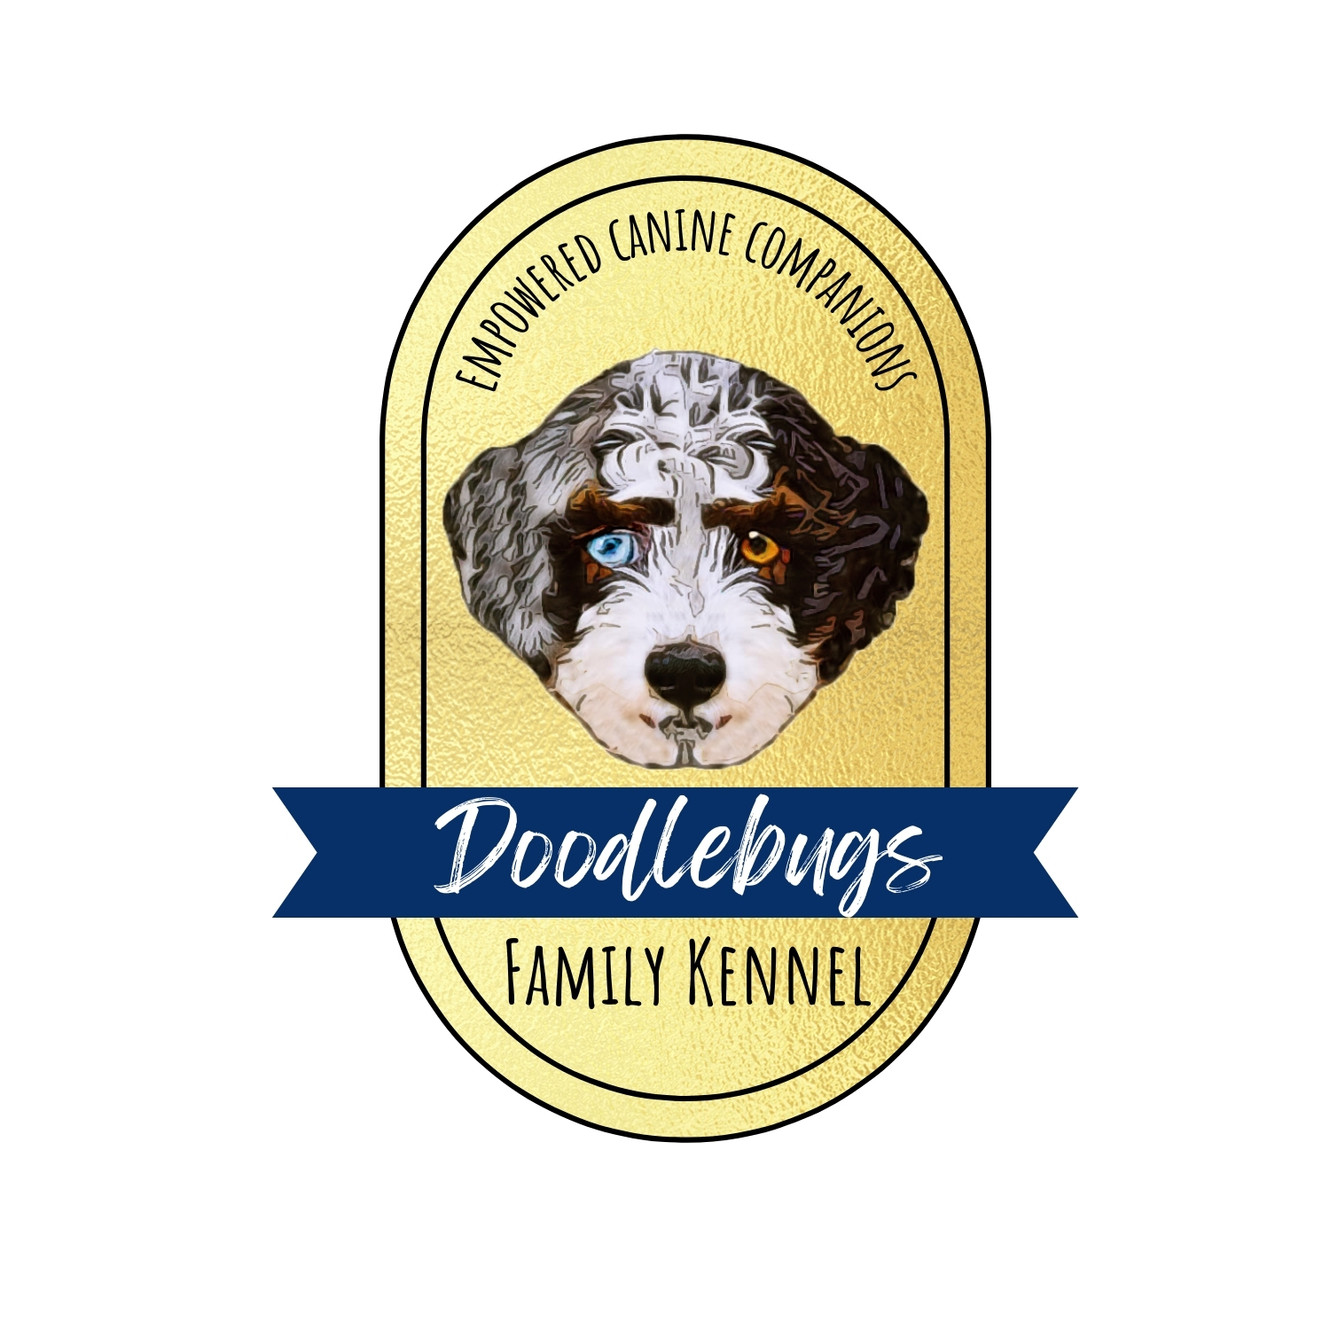 Doodles Puppy & Breeding - Greencastle, PA | Doodlebugs Family Kennel